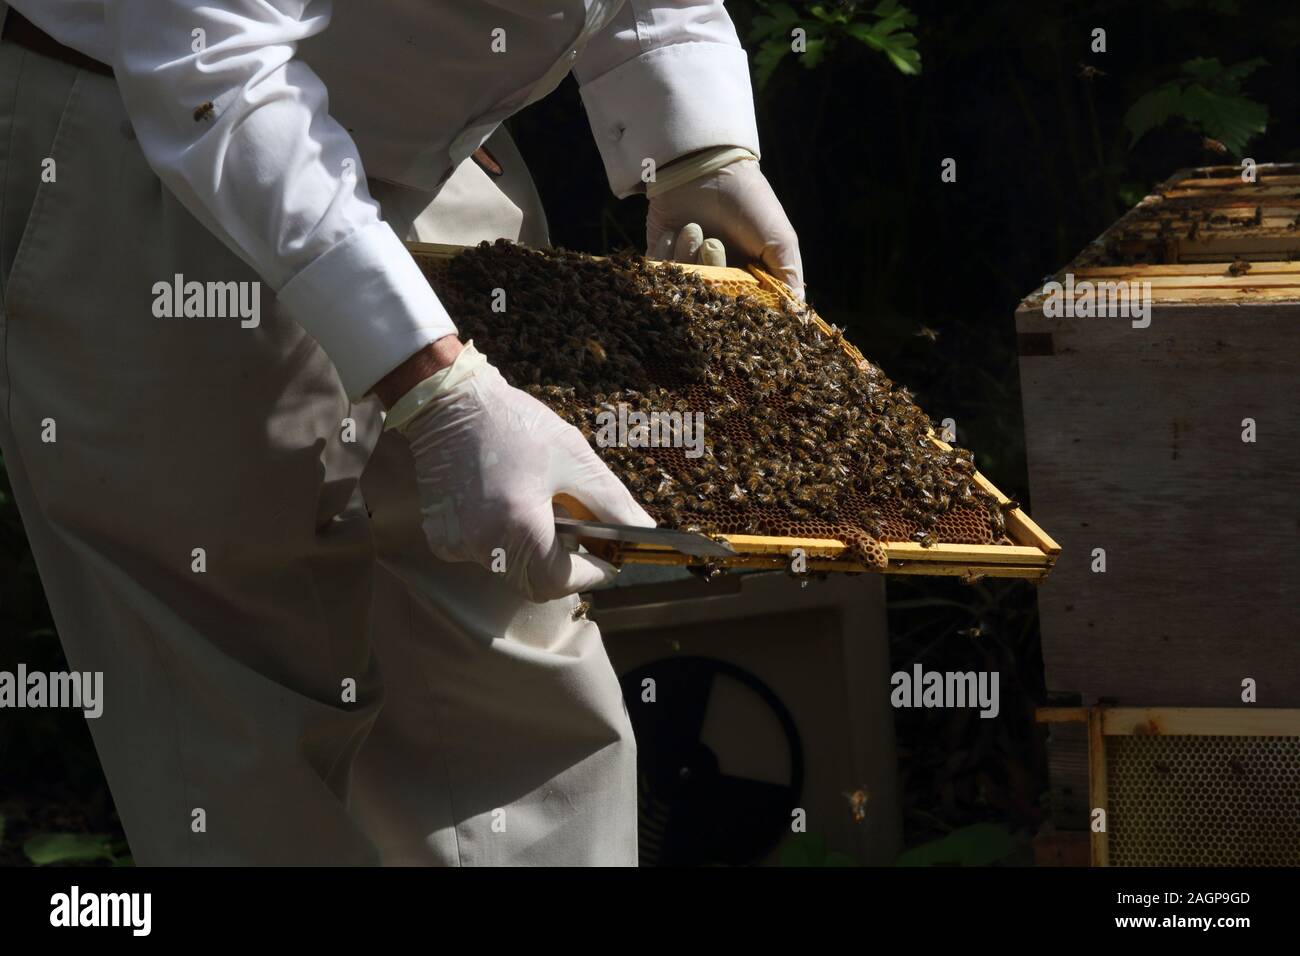 Beekeeper Holding Frame from A Beehive With Honey Bees Queen cell on edge of frame Surrey England Stock Photo